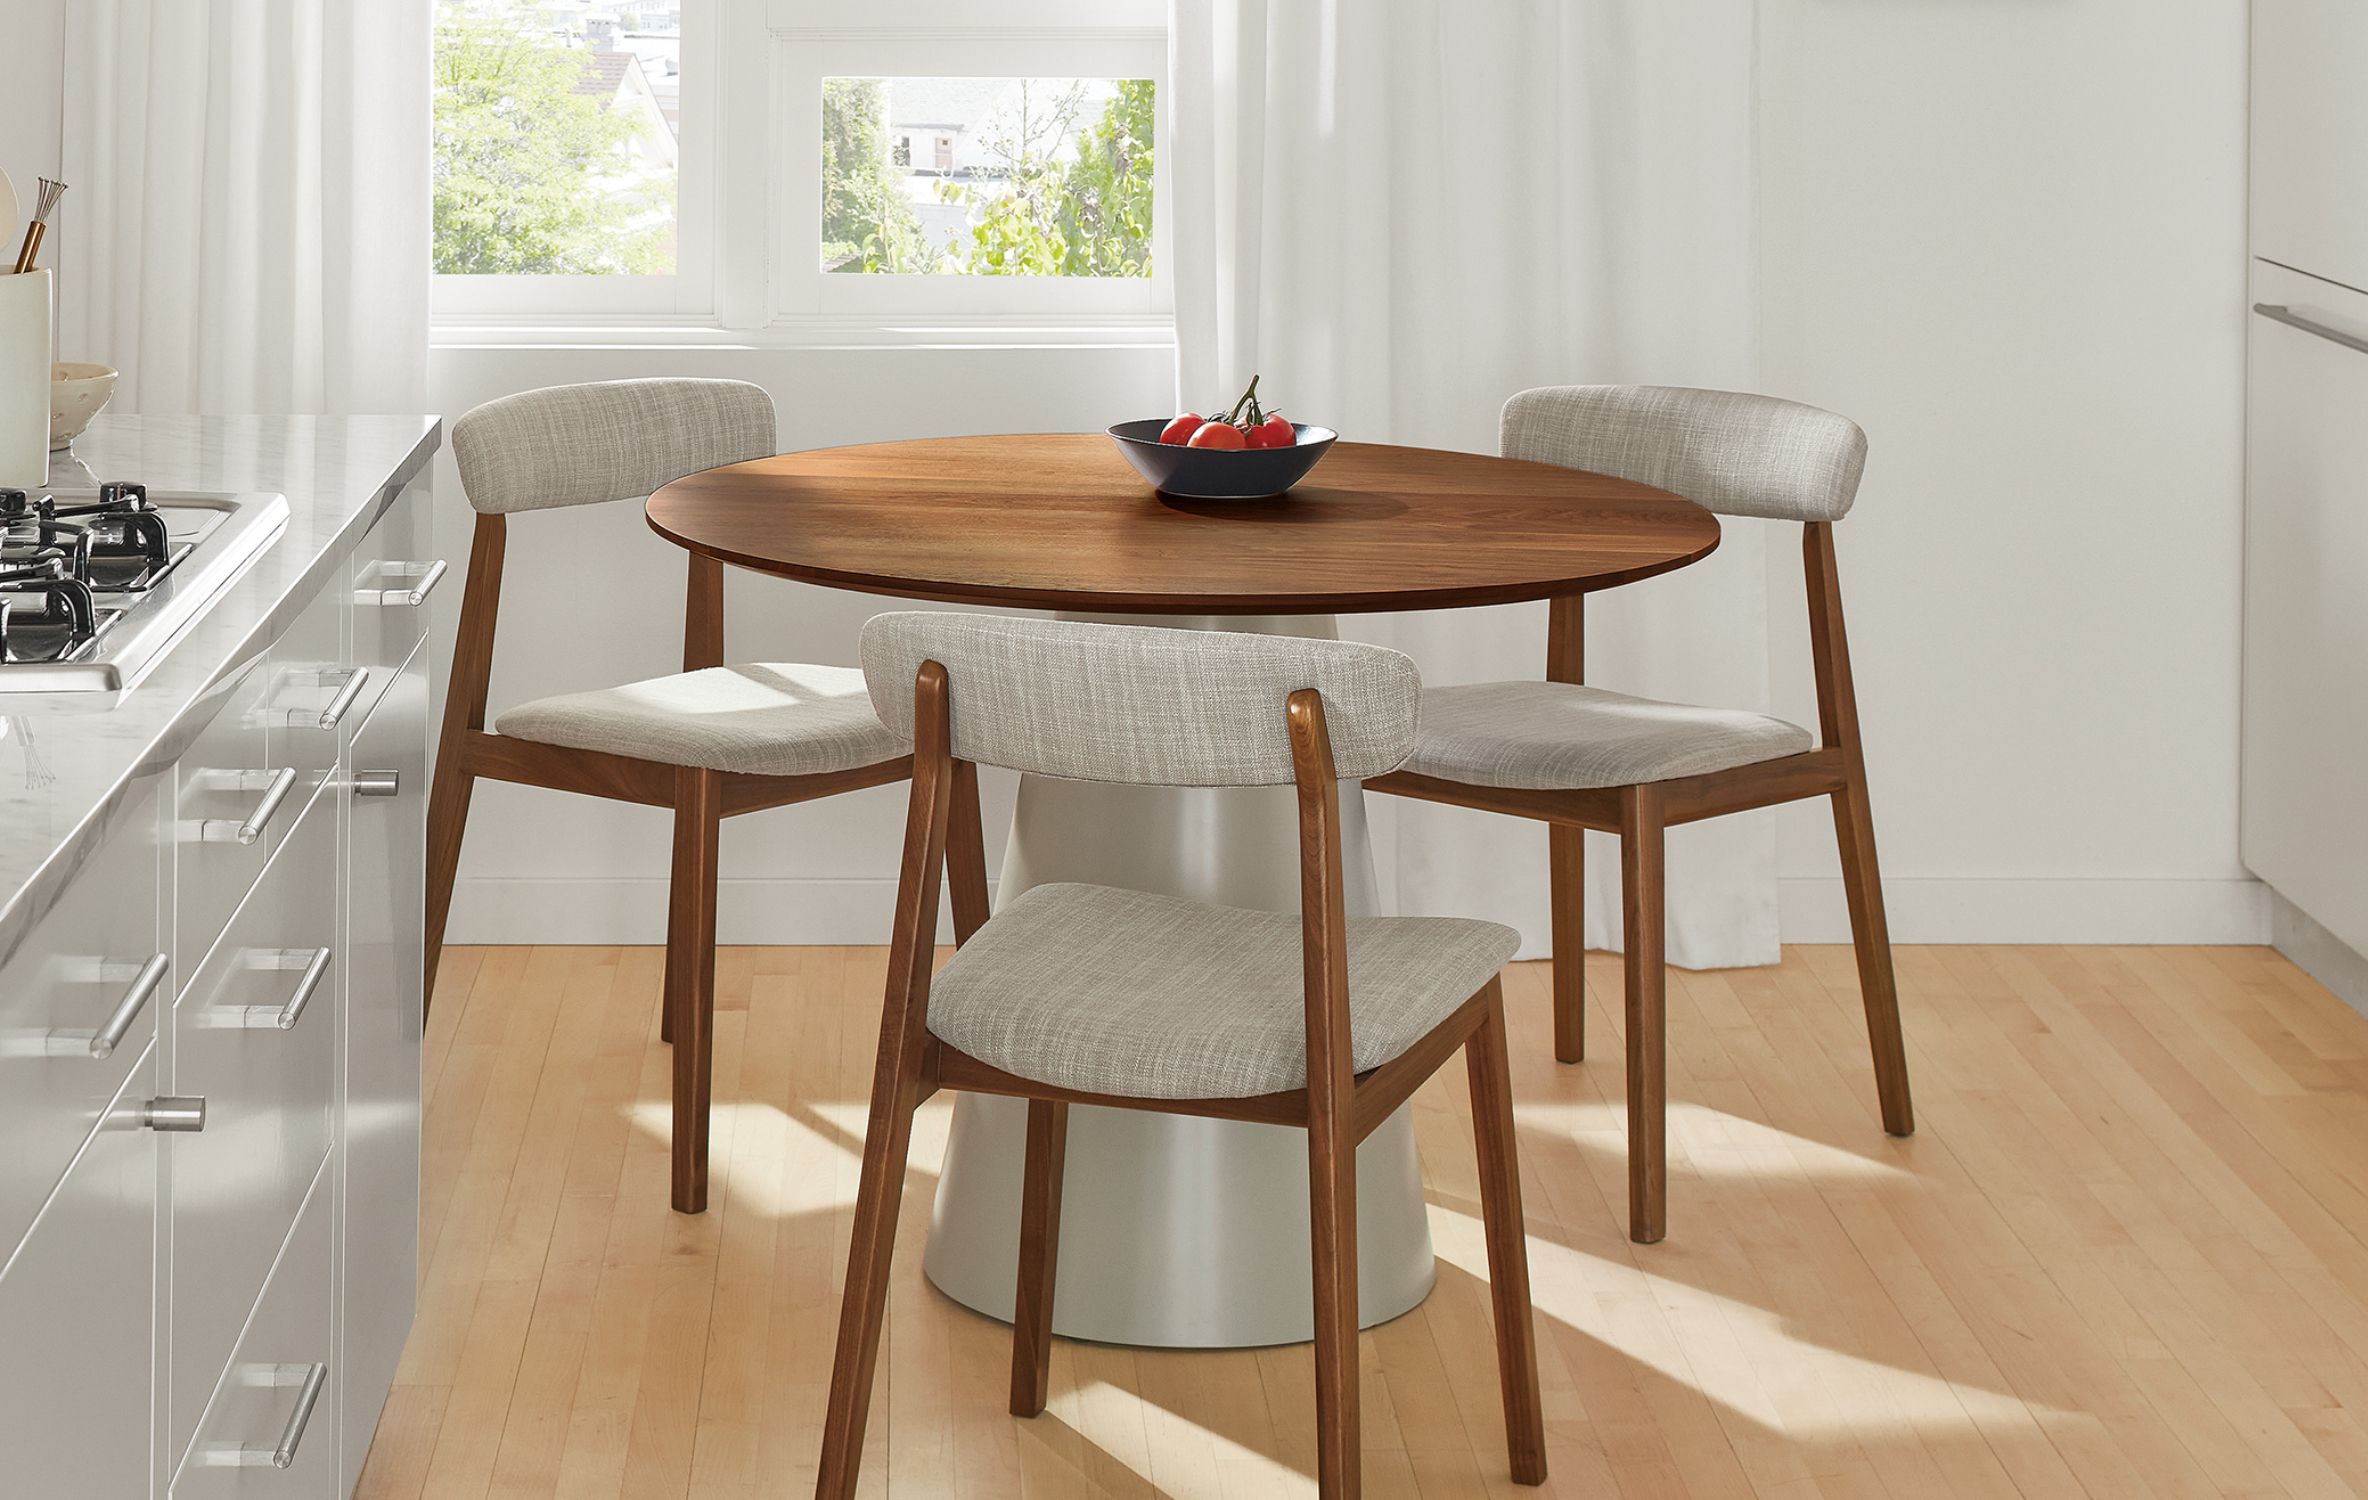 Dining Tables & Chairs for Small Spaces - Ideas & Advice - Room